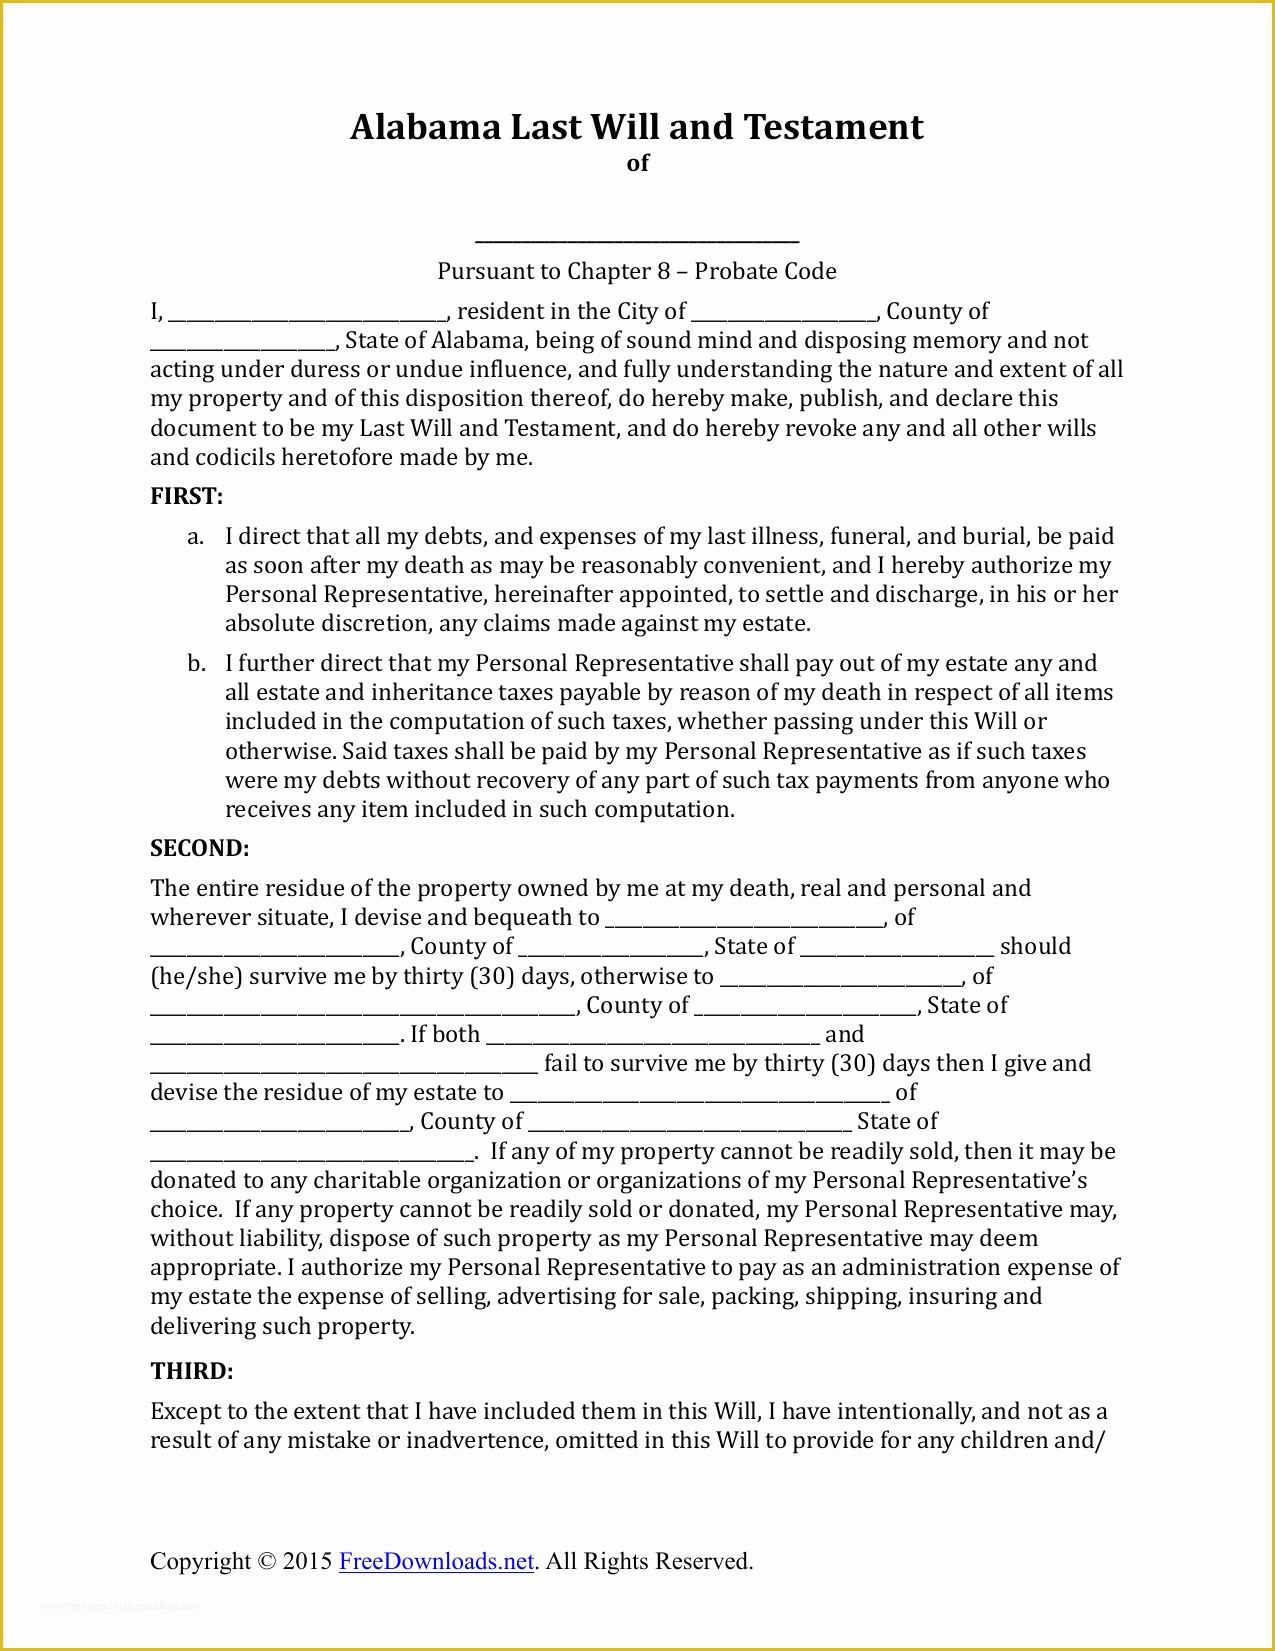 Free Last Will and Testament Template Pdf Of Download Alabama Last Will and Testament form Pdf